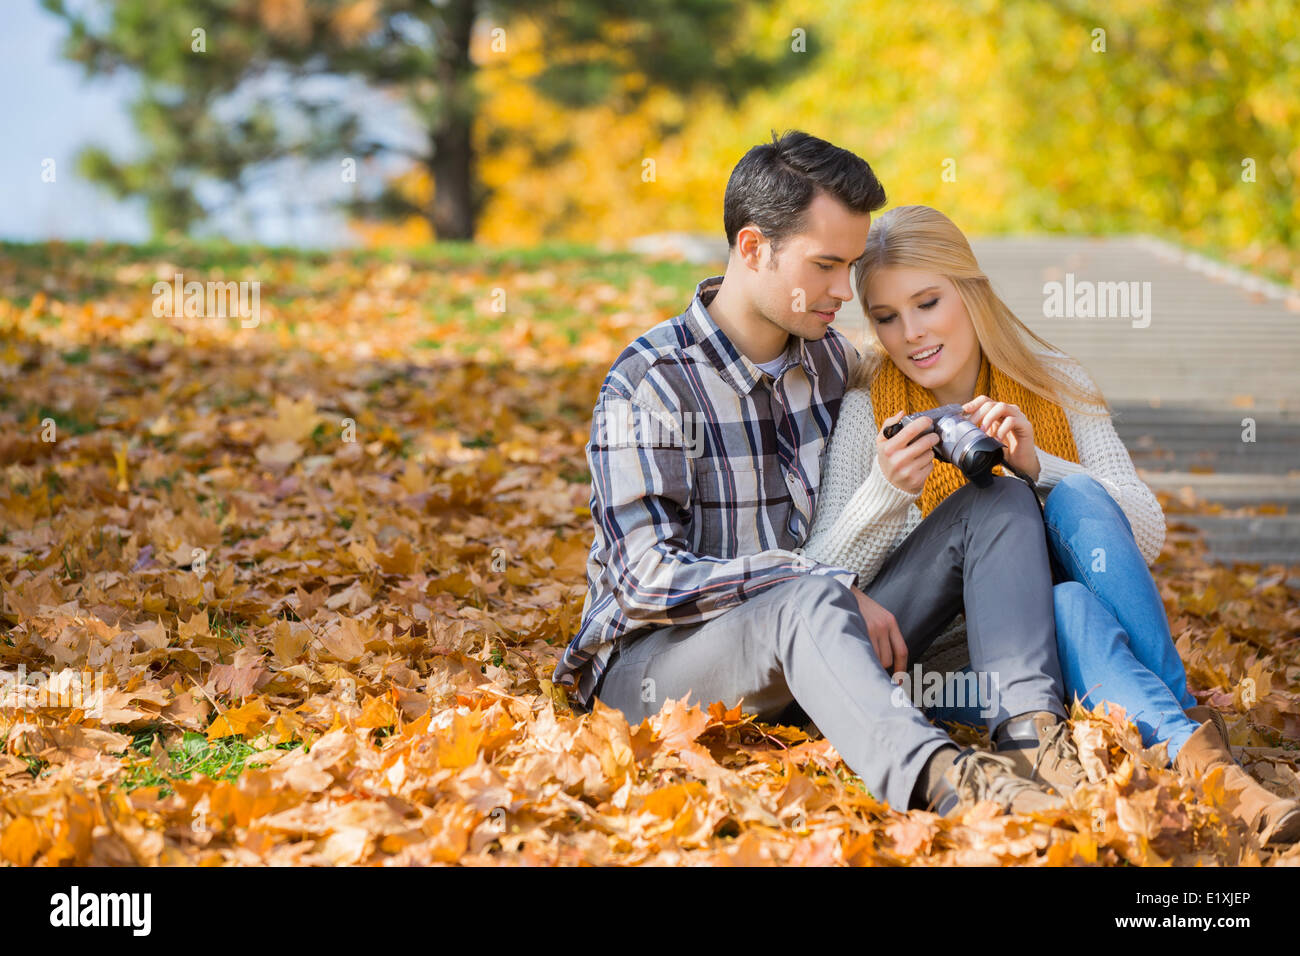 Couple looking at pictures on digital camera in park during autumn Stock Photo